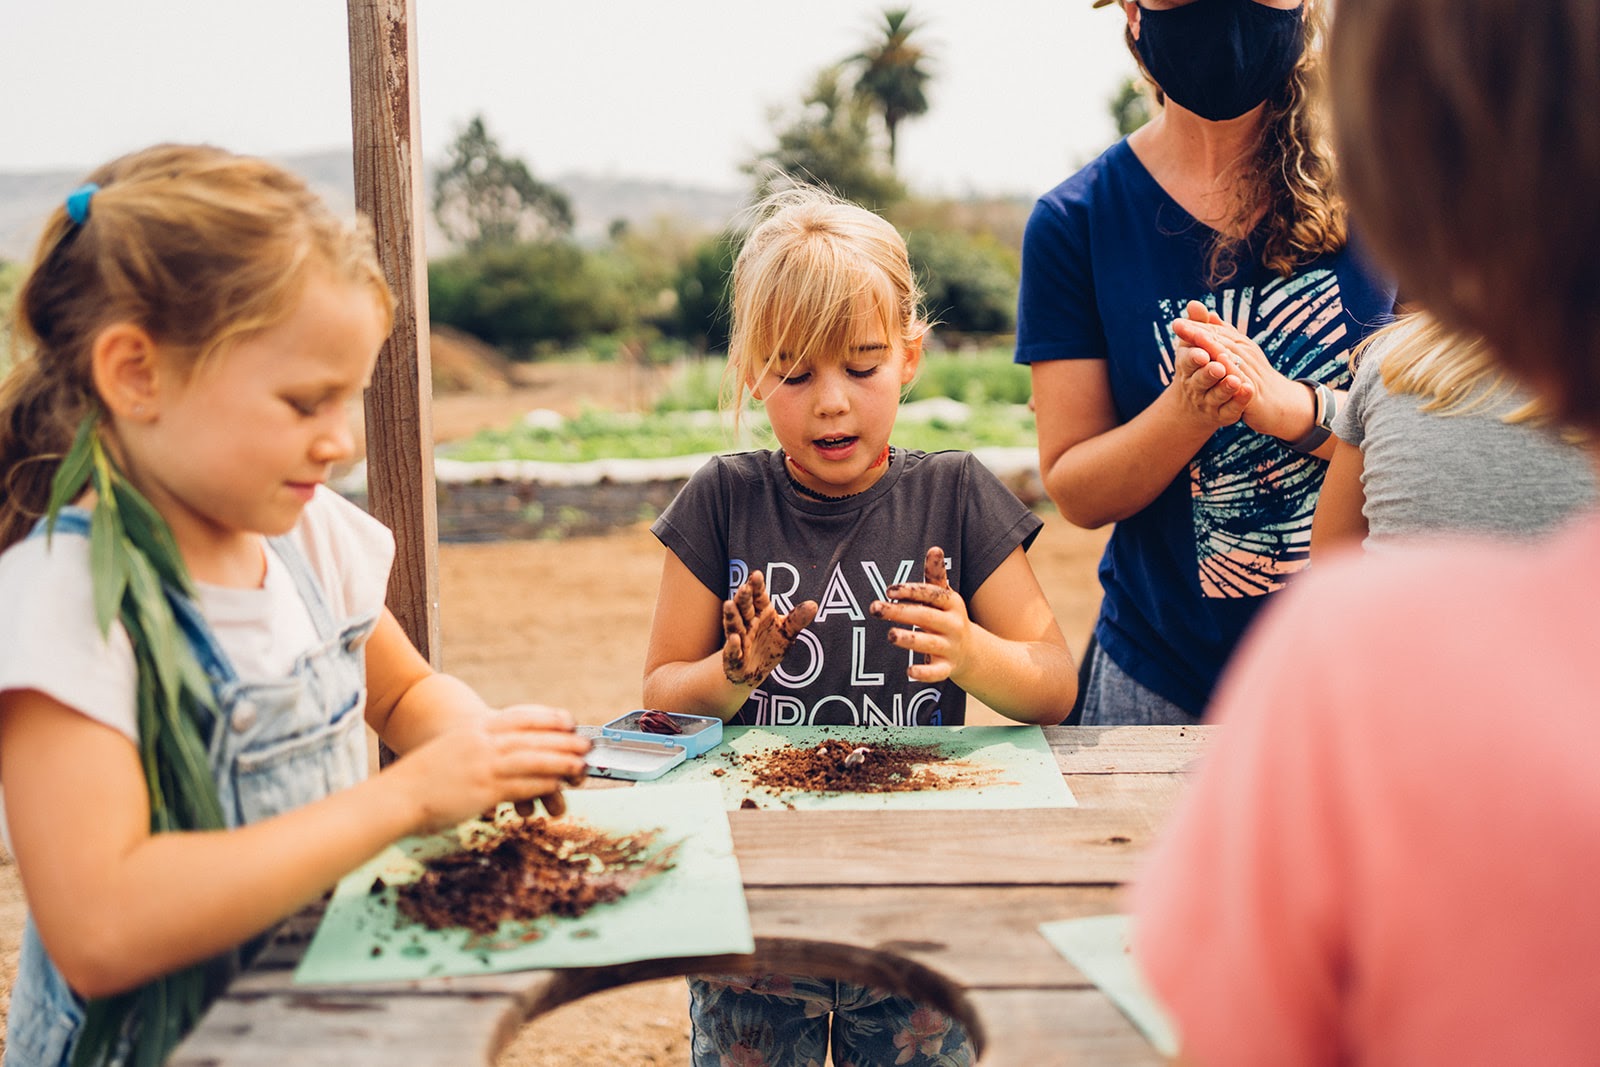 Kids playing with soil